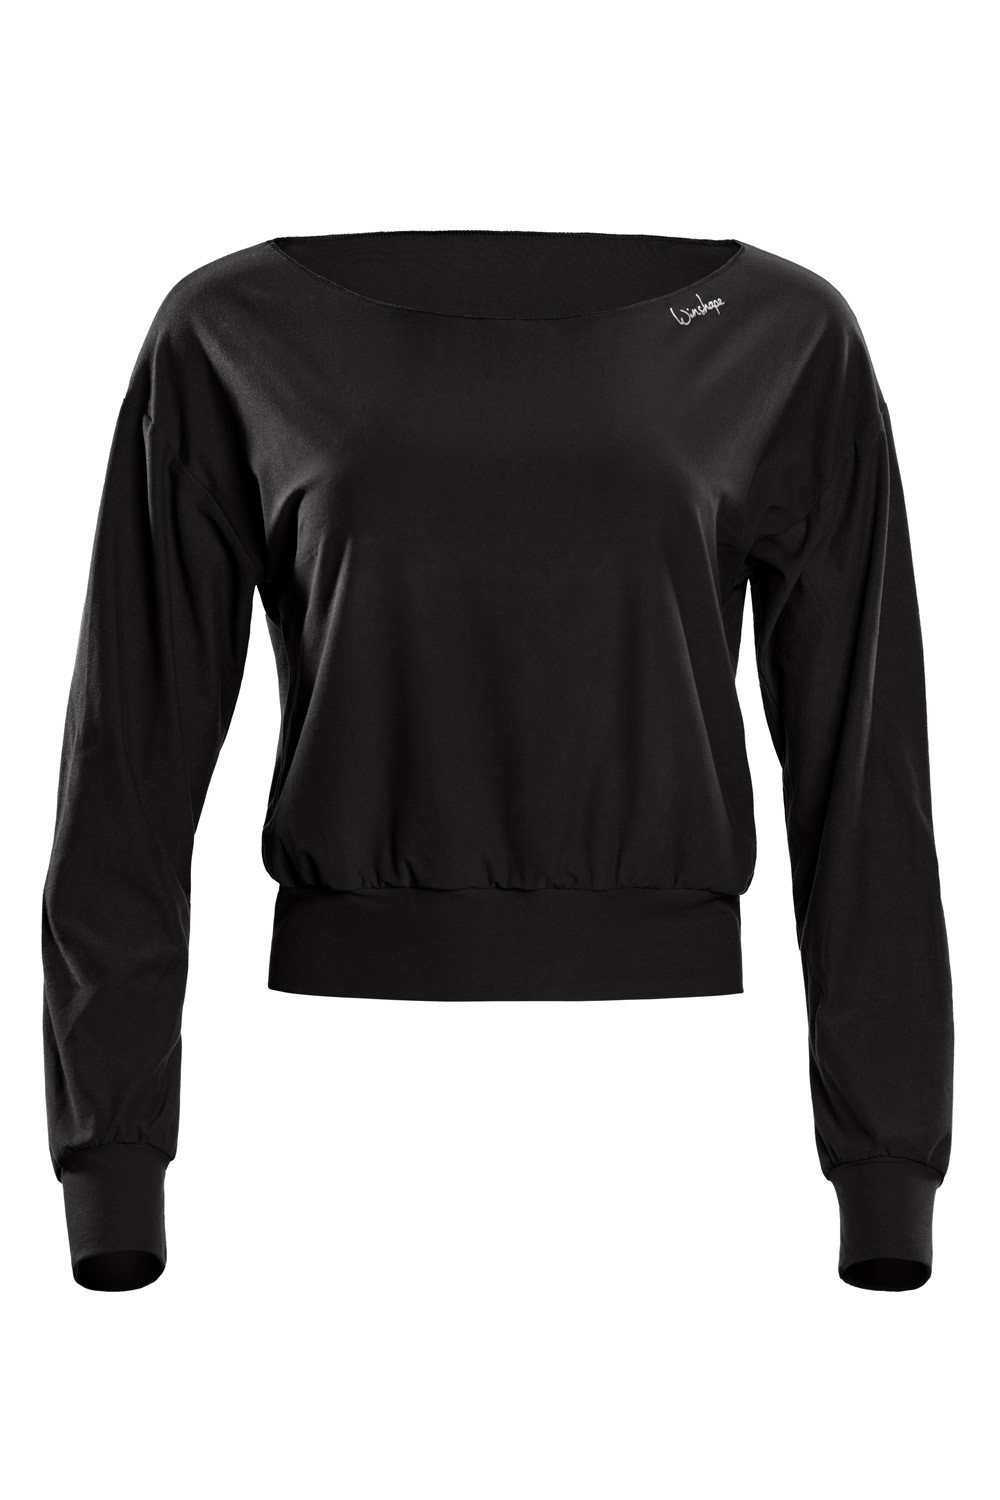 Functional Light and Long Style Cropped Street Sleeve LS003LS, Soft Winshape Top schwarz